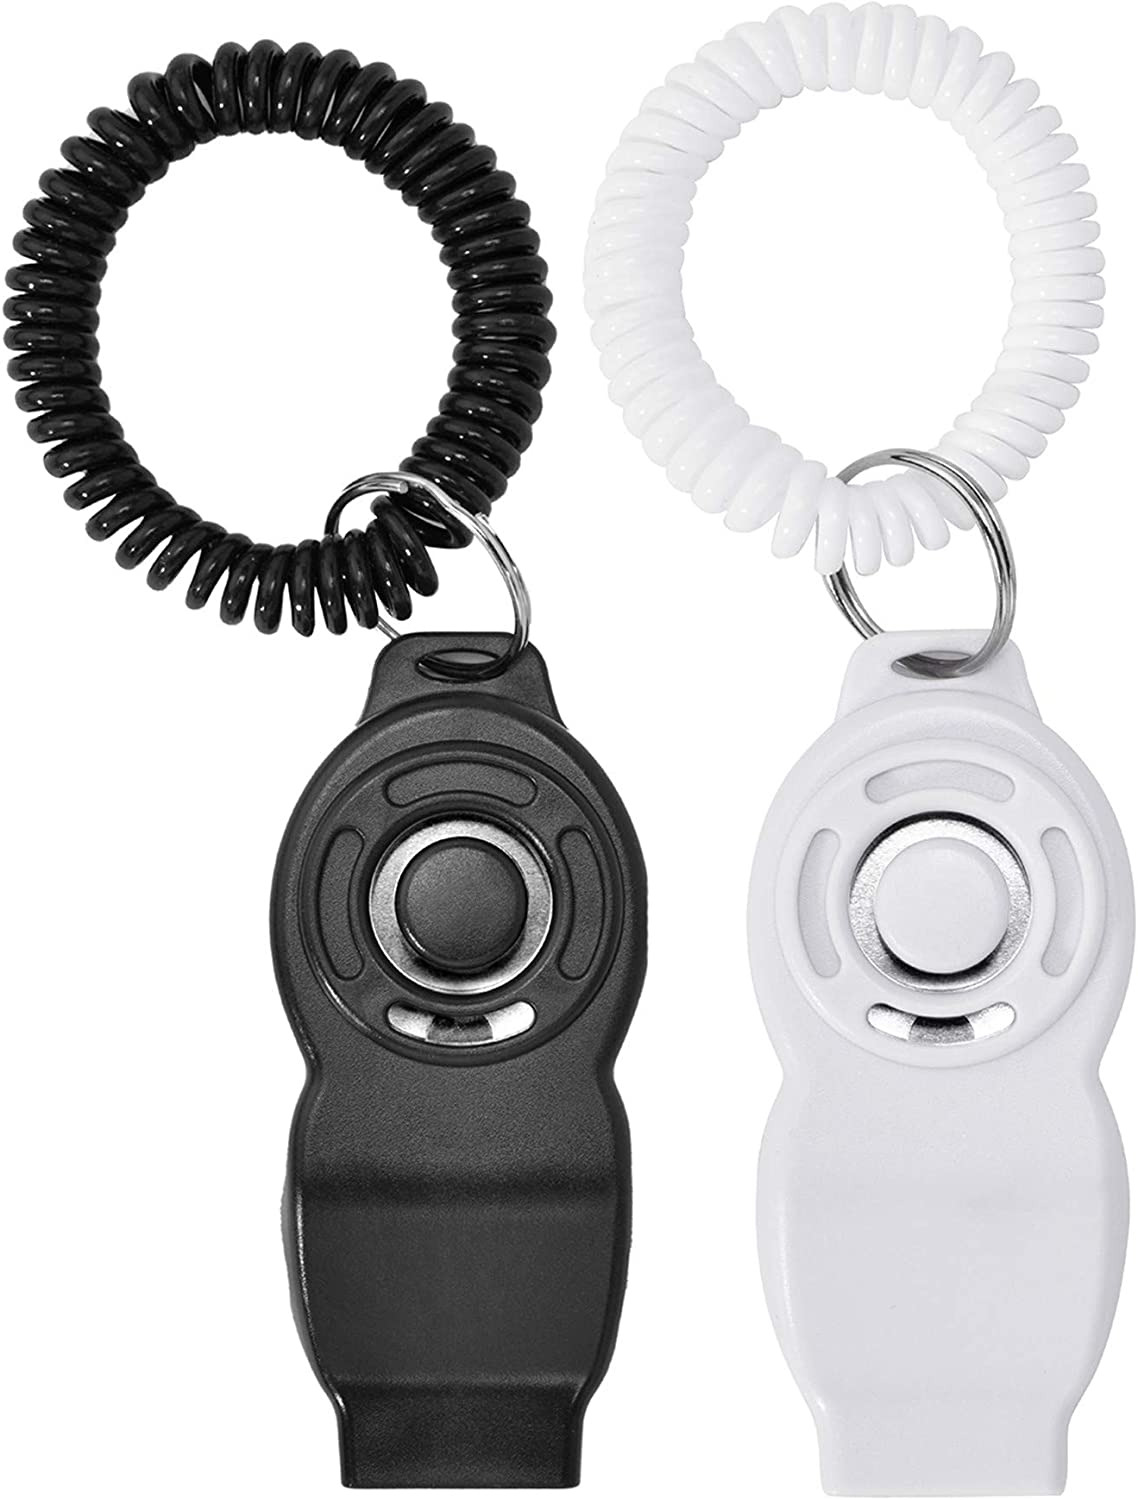 Dog Training Clickers and Whistle in One, Consistent Positive Reinforcement for 